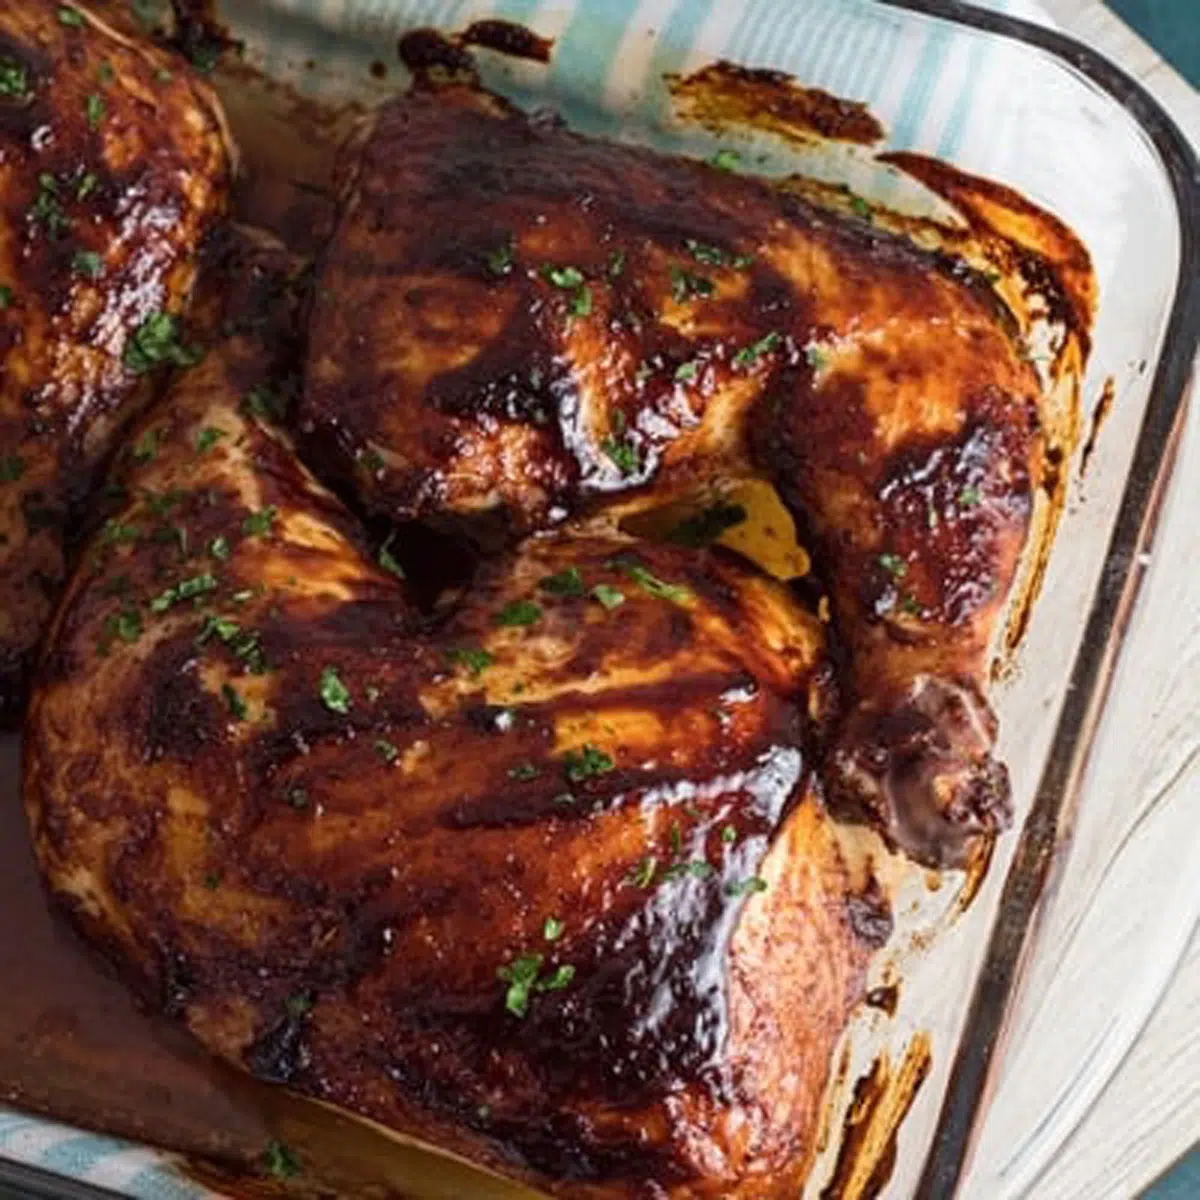 What to serve with bbq chicken for the best dinners image of bbq chicken.